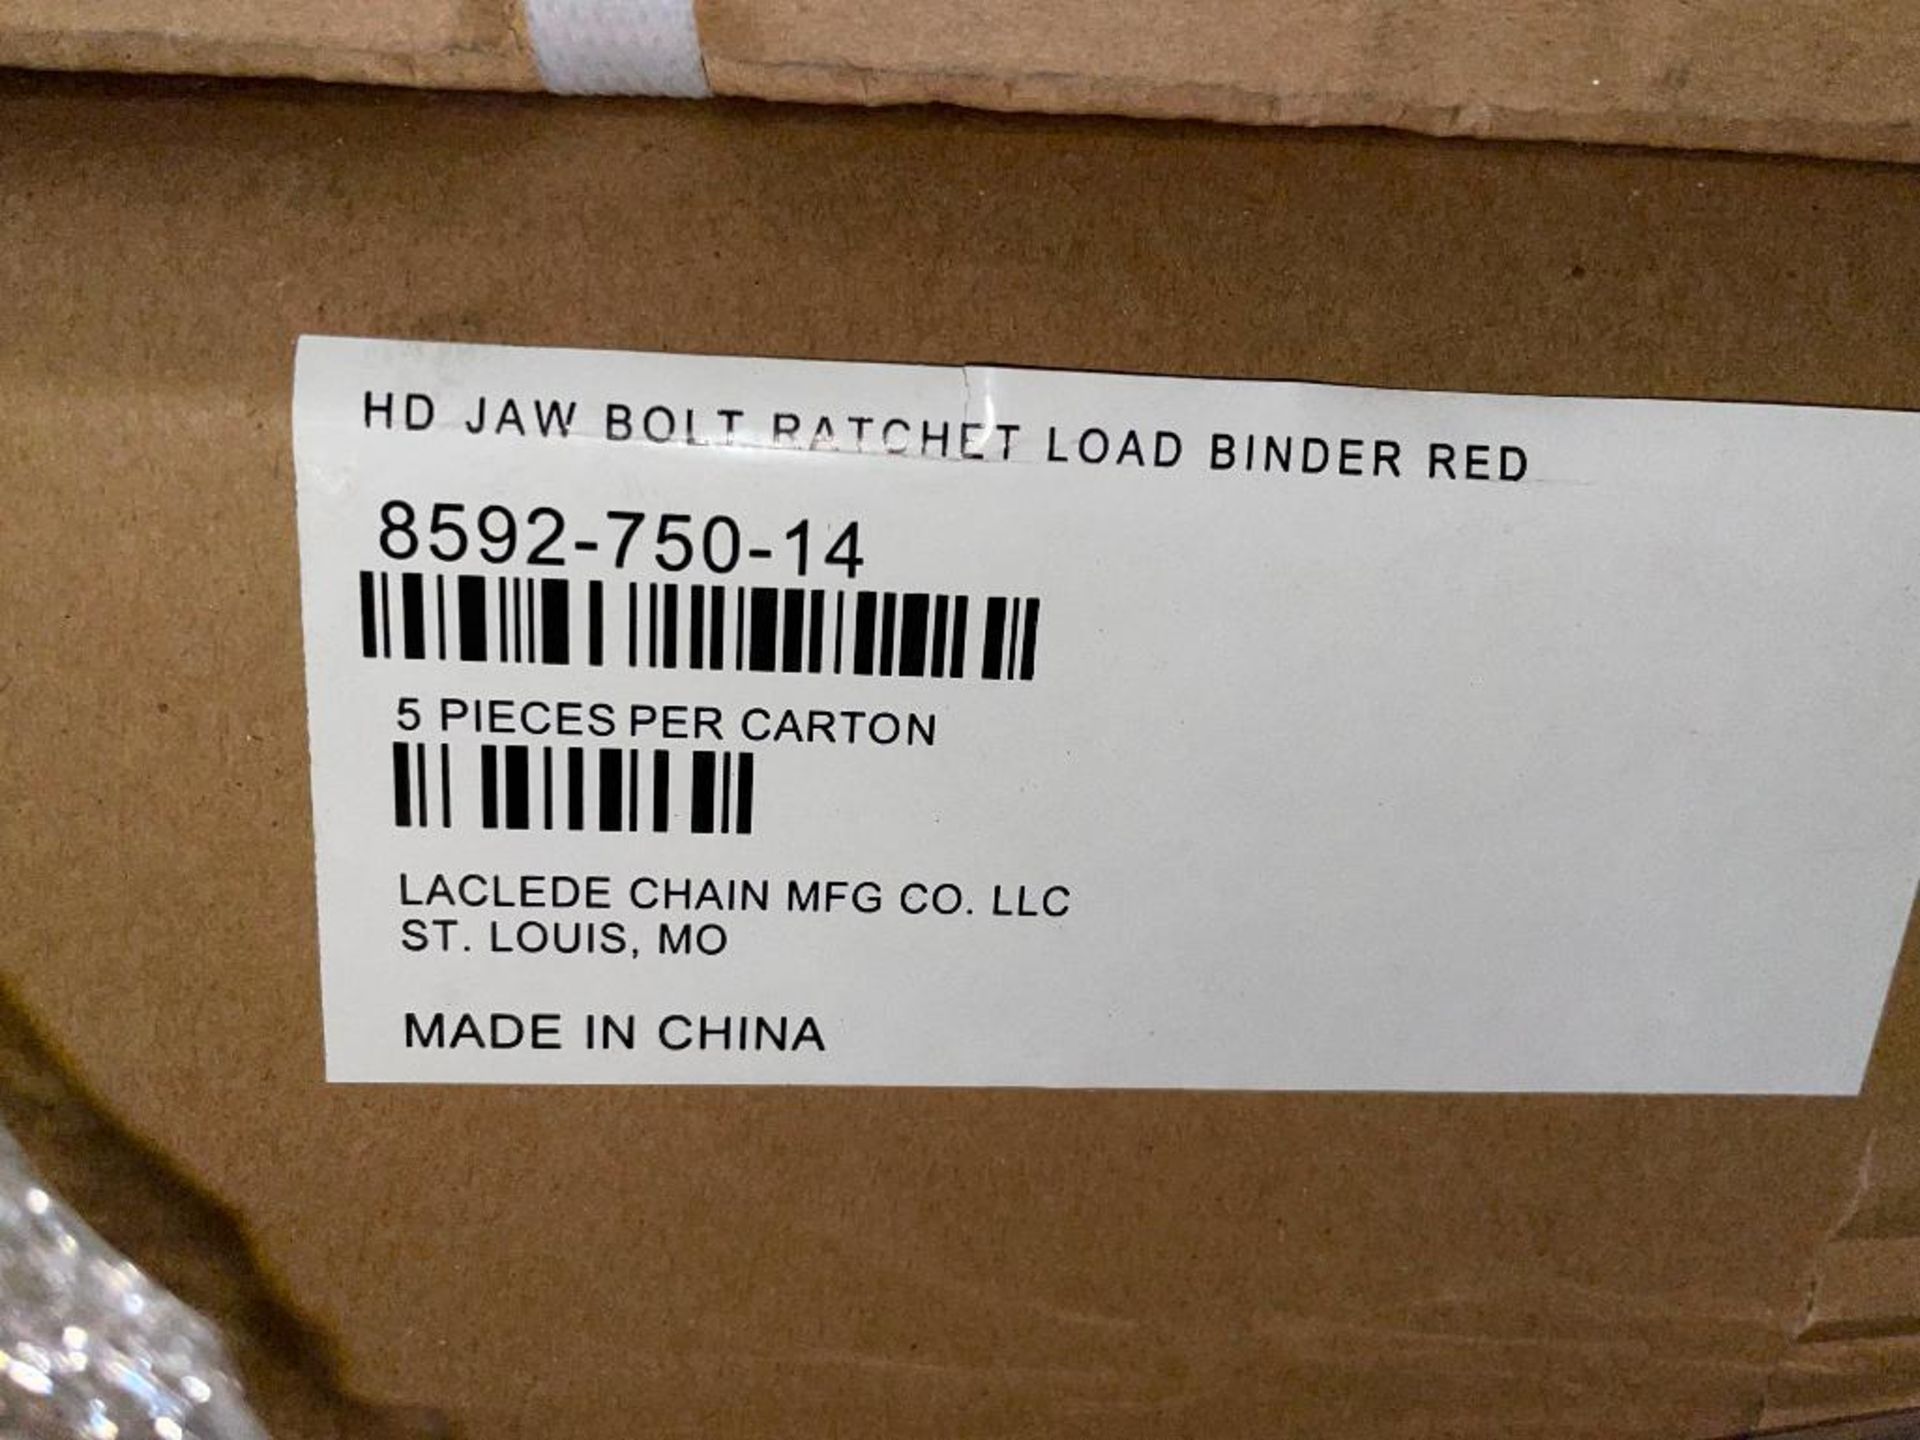 DESCRIPTION: (2) CASES OF HD JAW BOLT RATCHET LOAD BINDERS - RED. 5 PER CASE, 10 IN LOT TOTAL. BRAND - Image 8 of 8